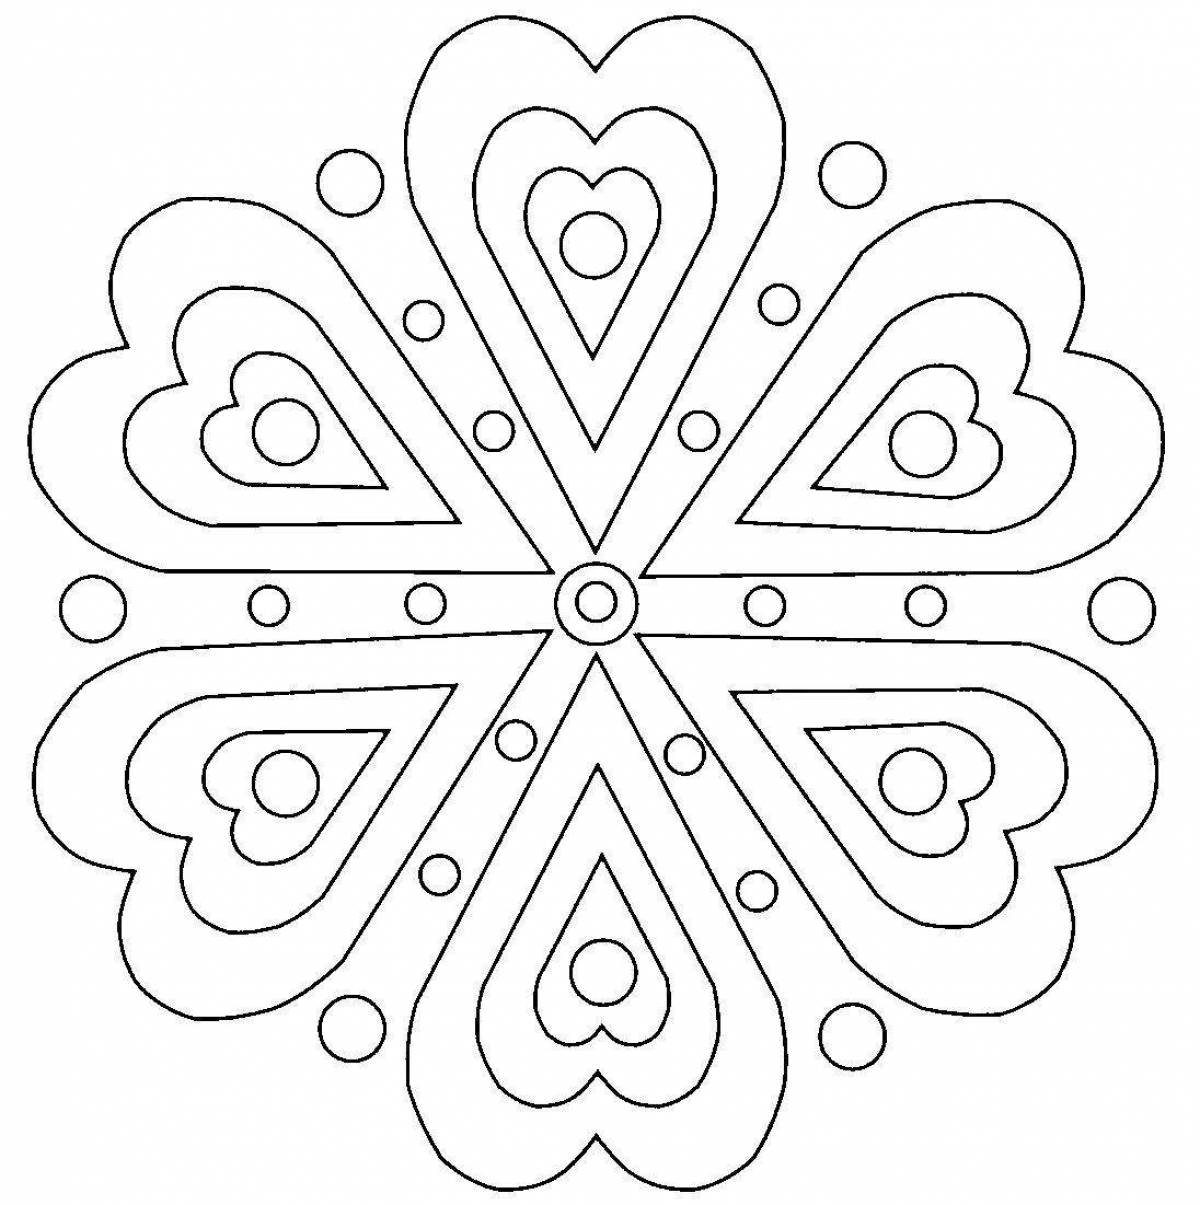 Intricate light pattern coloring page